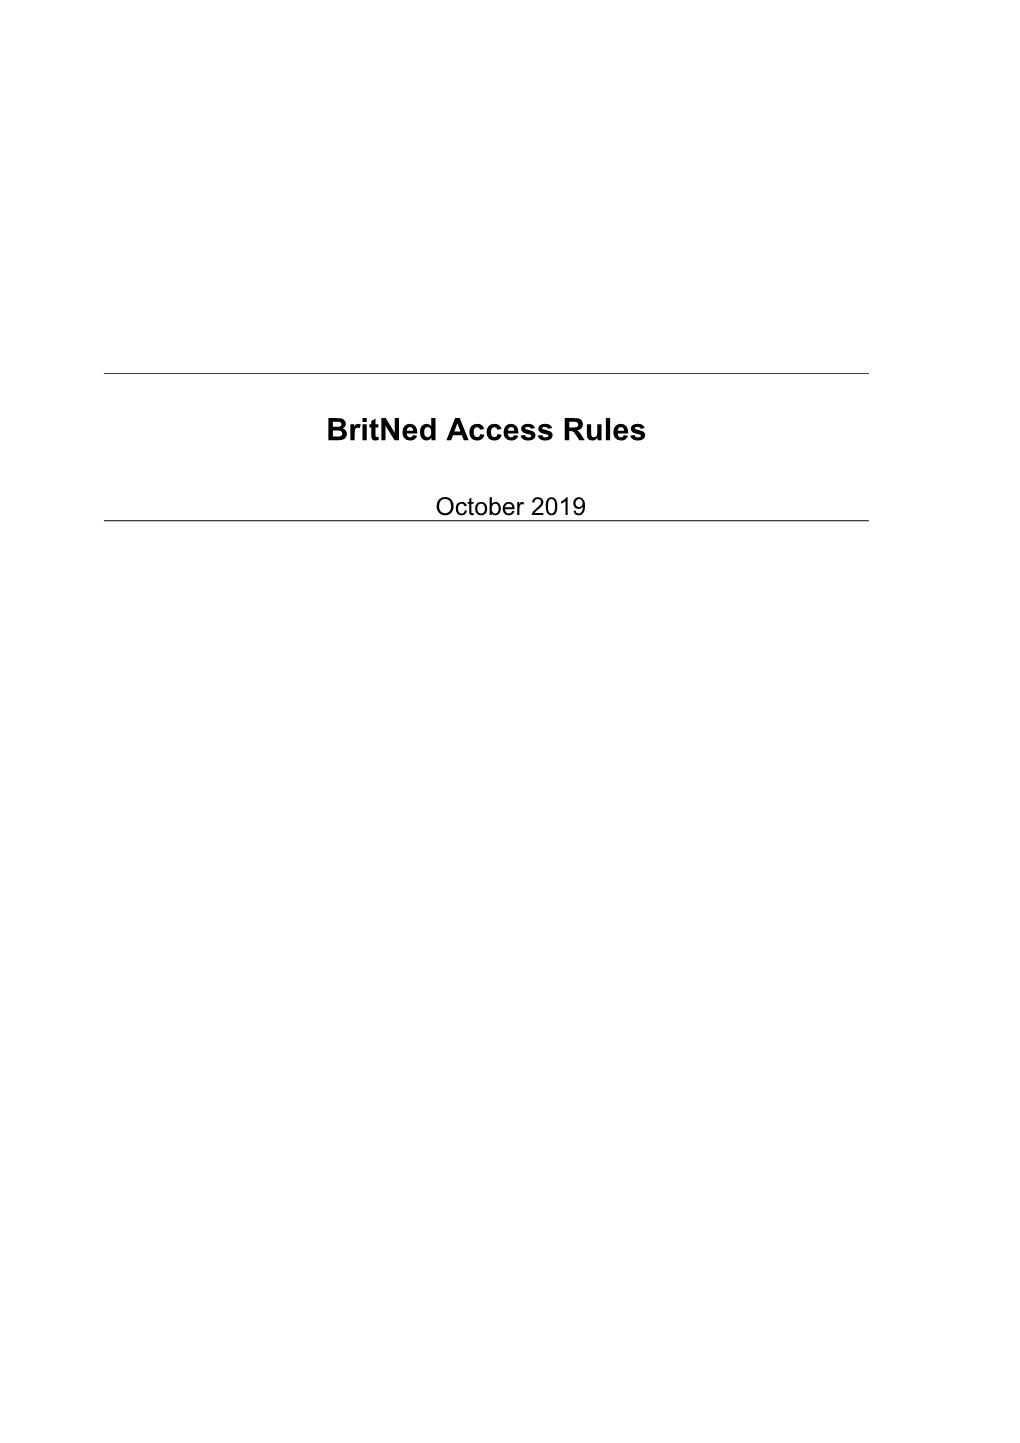 Britned Access Rules